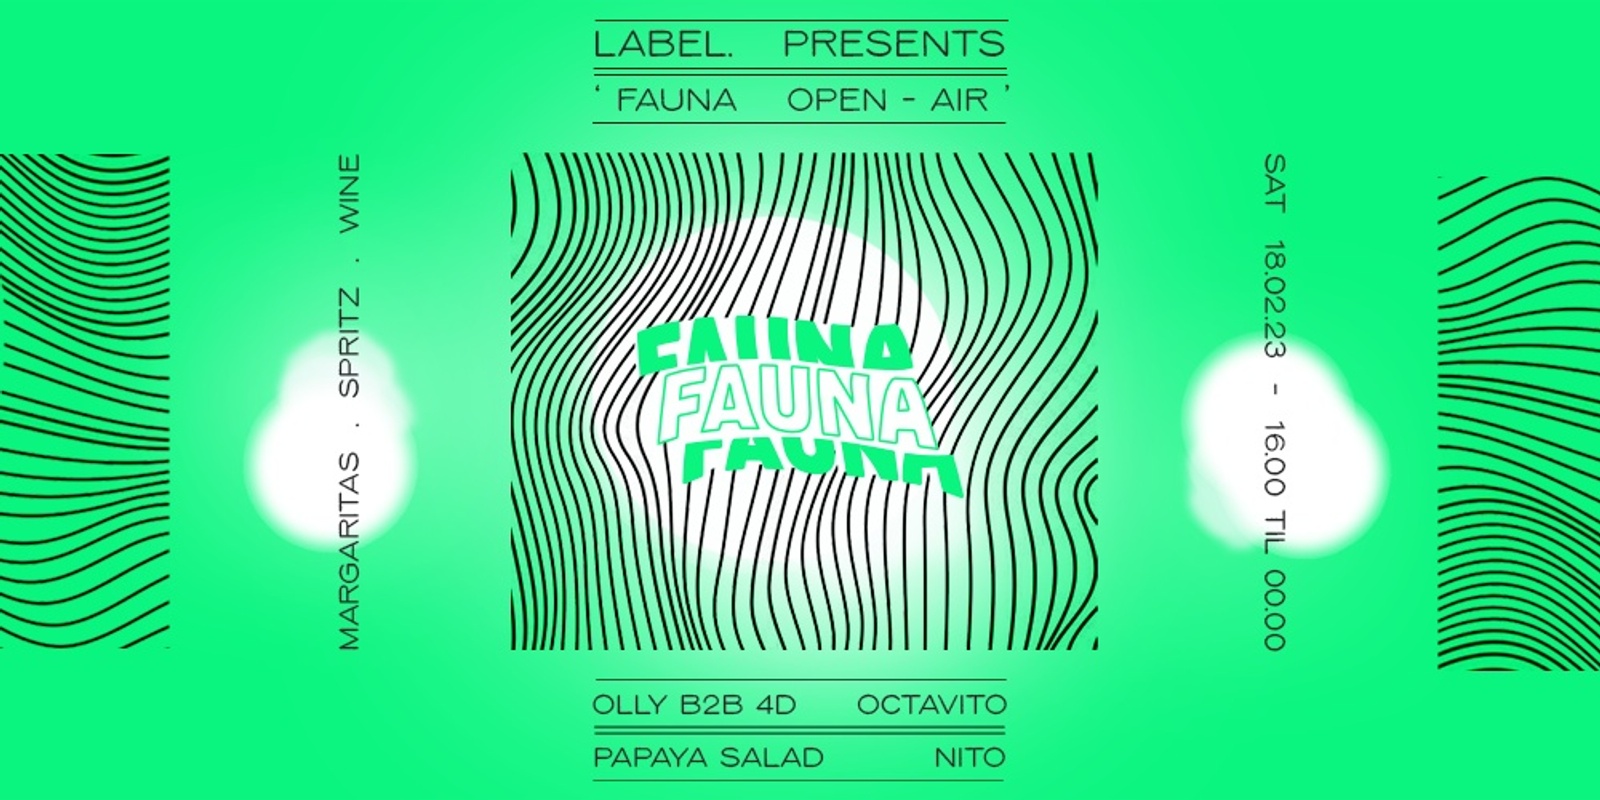 Banner image for FAUNA OPEN AIR X LABEL.